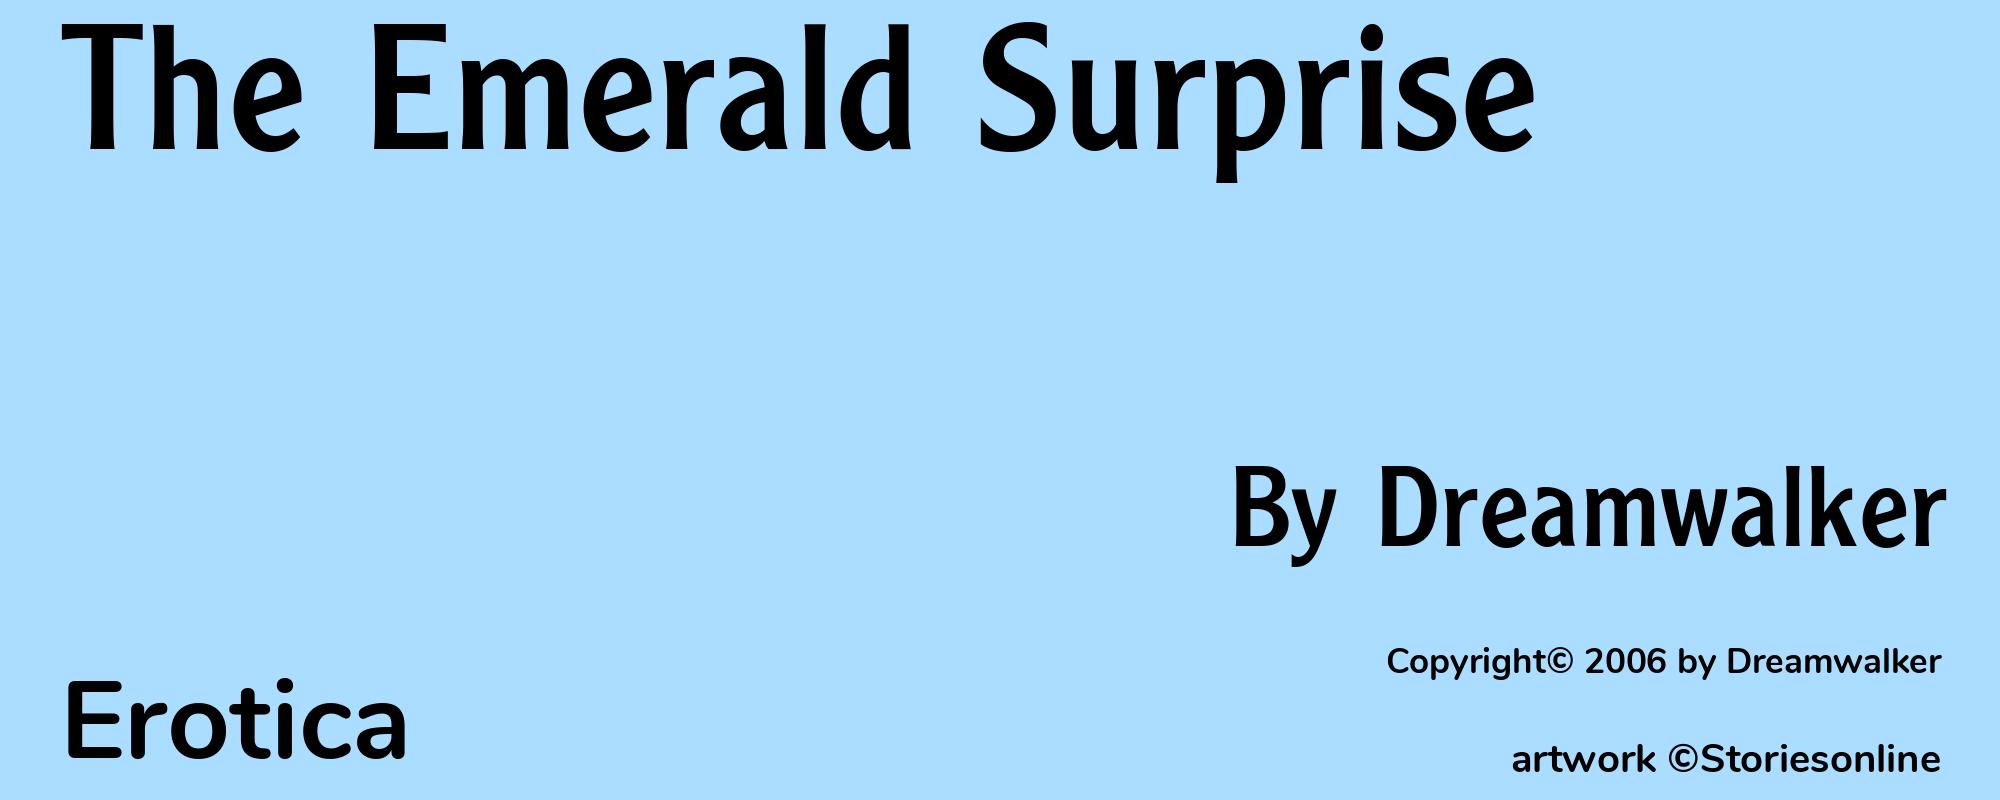 The Emerald Surprise - Cover